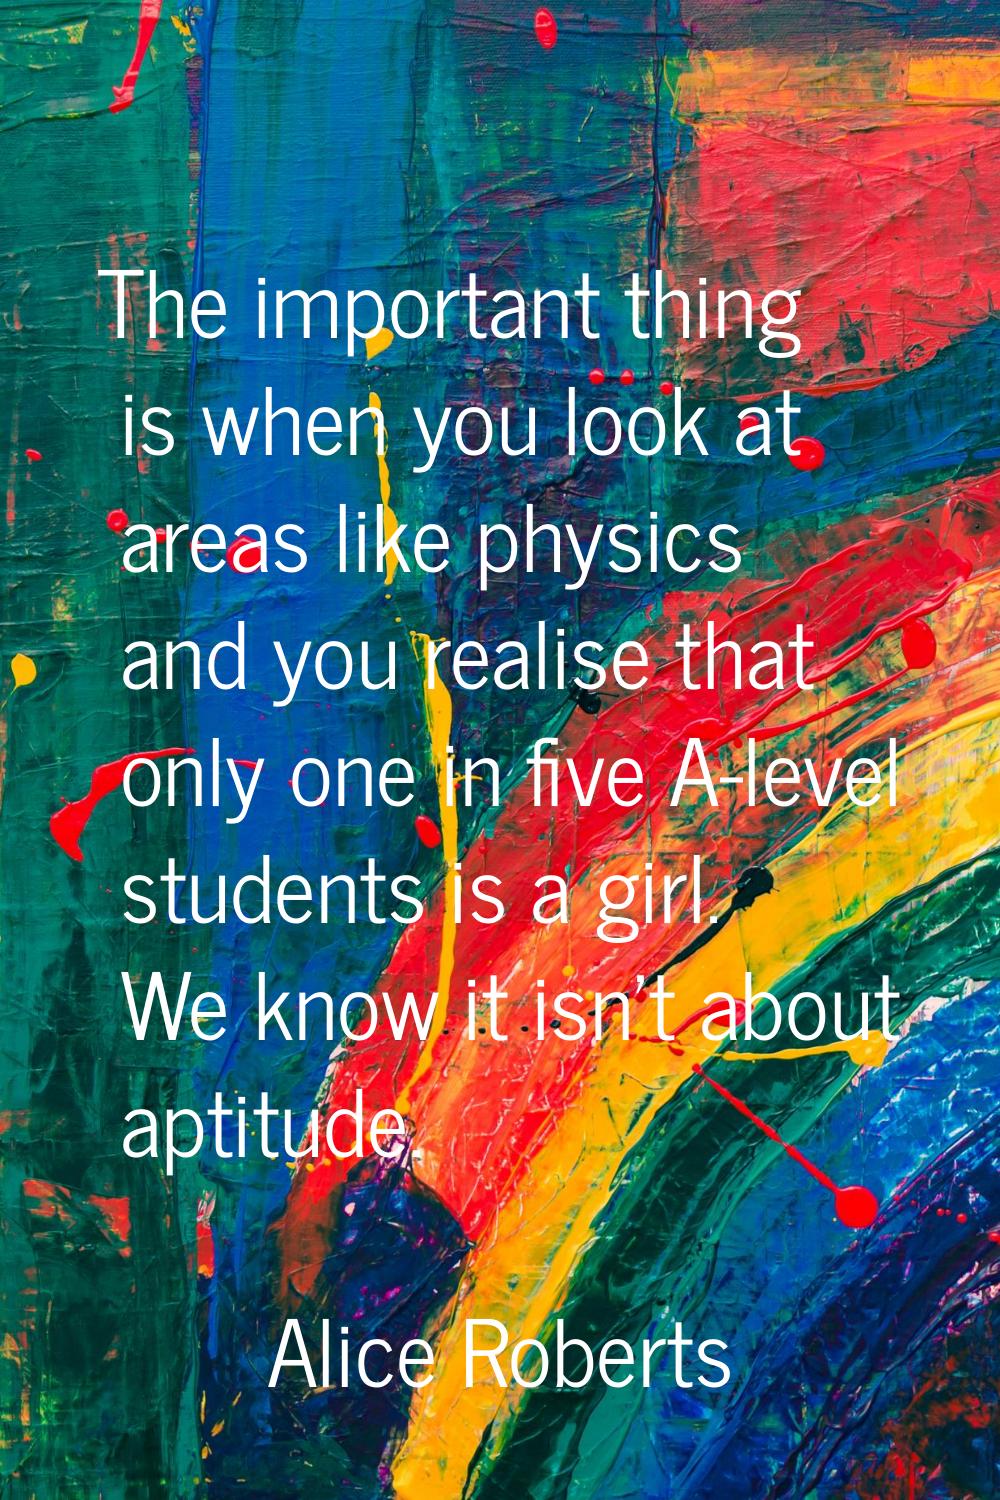 The important thing is when you look at areas like physics and you realise that only one in five A-